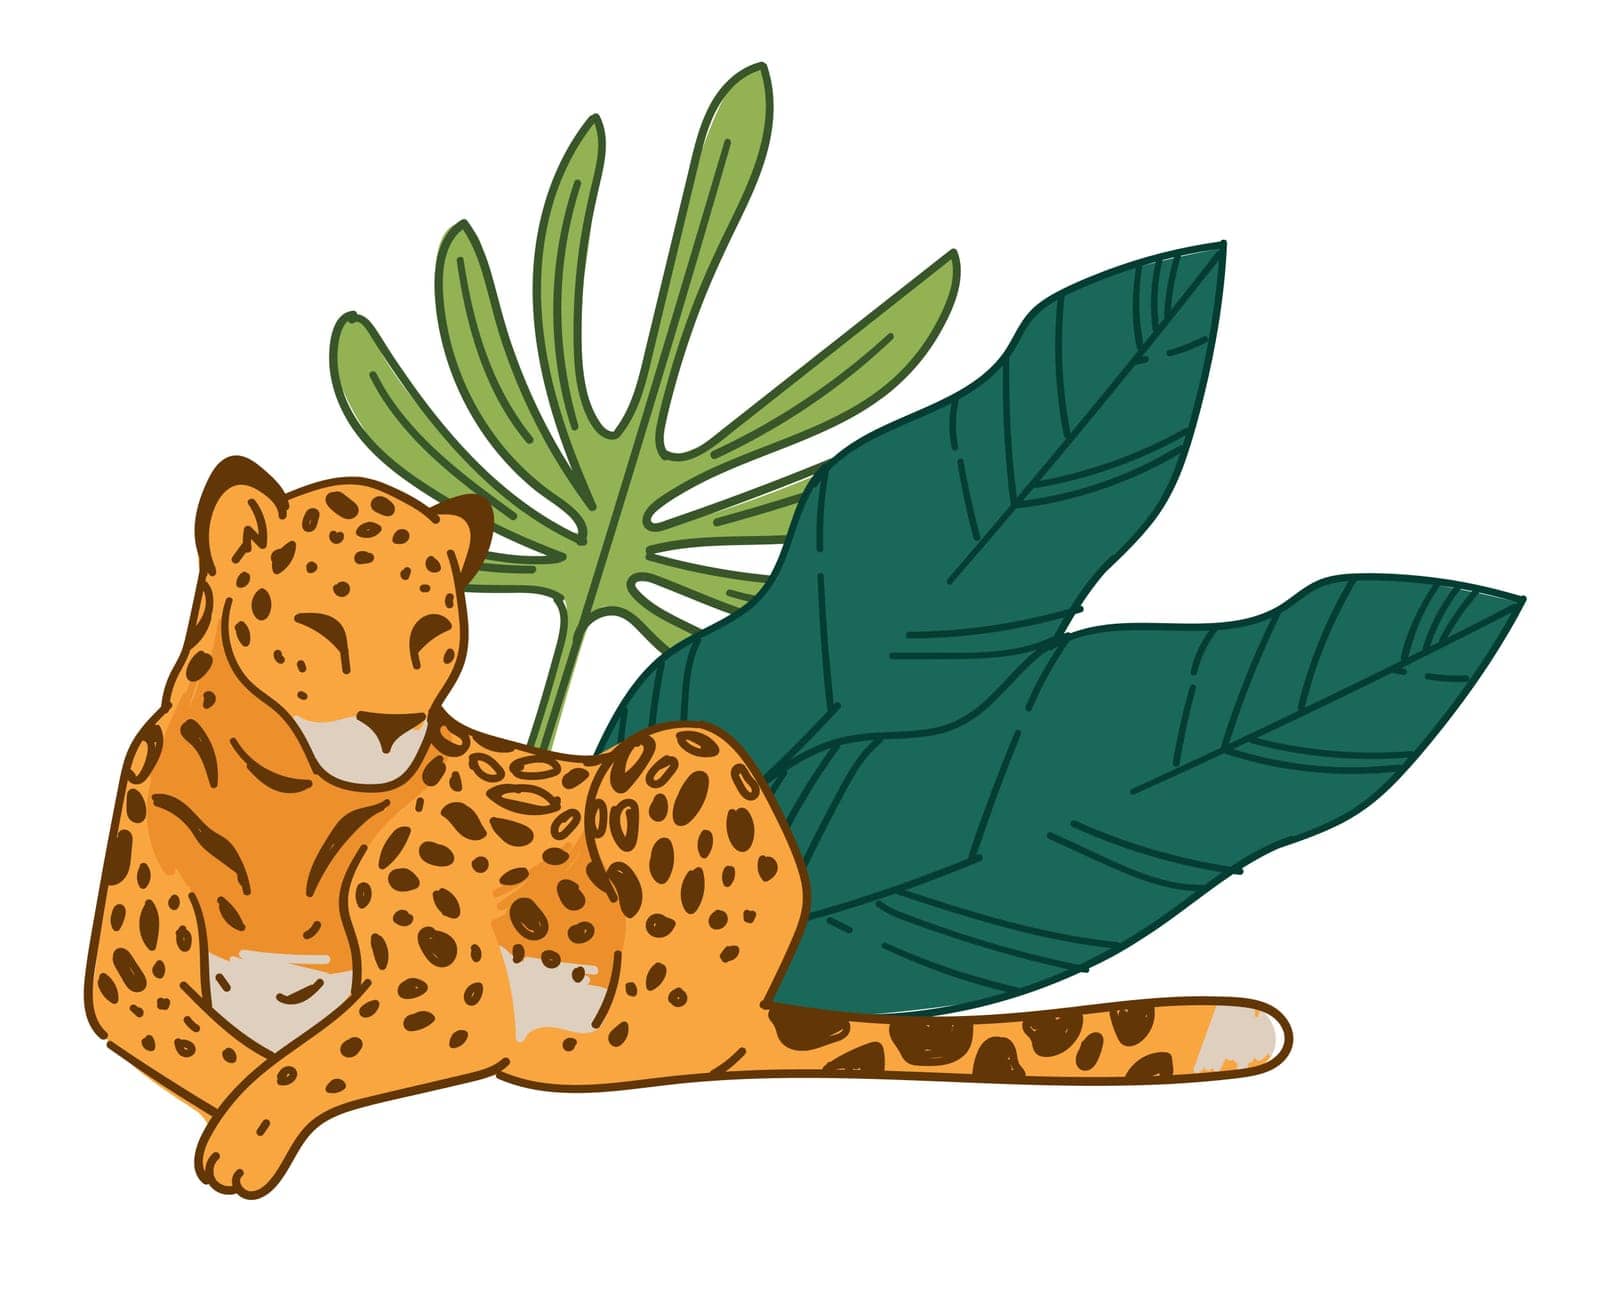 Panther laying by wide floral leaves of plant, isolated mammal animal with spots on fur. Jungle or savannah, african habitat of feline wild cat. Exotic forest or rainforest. Vector in flat style